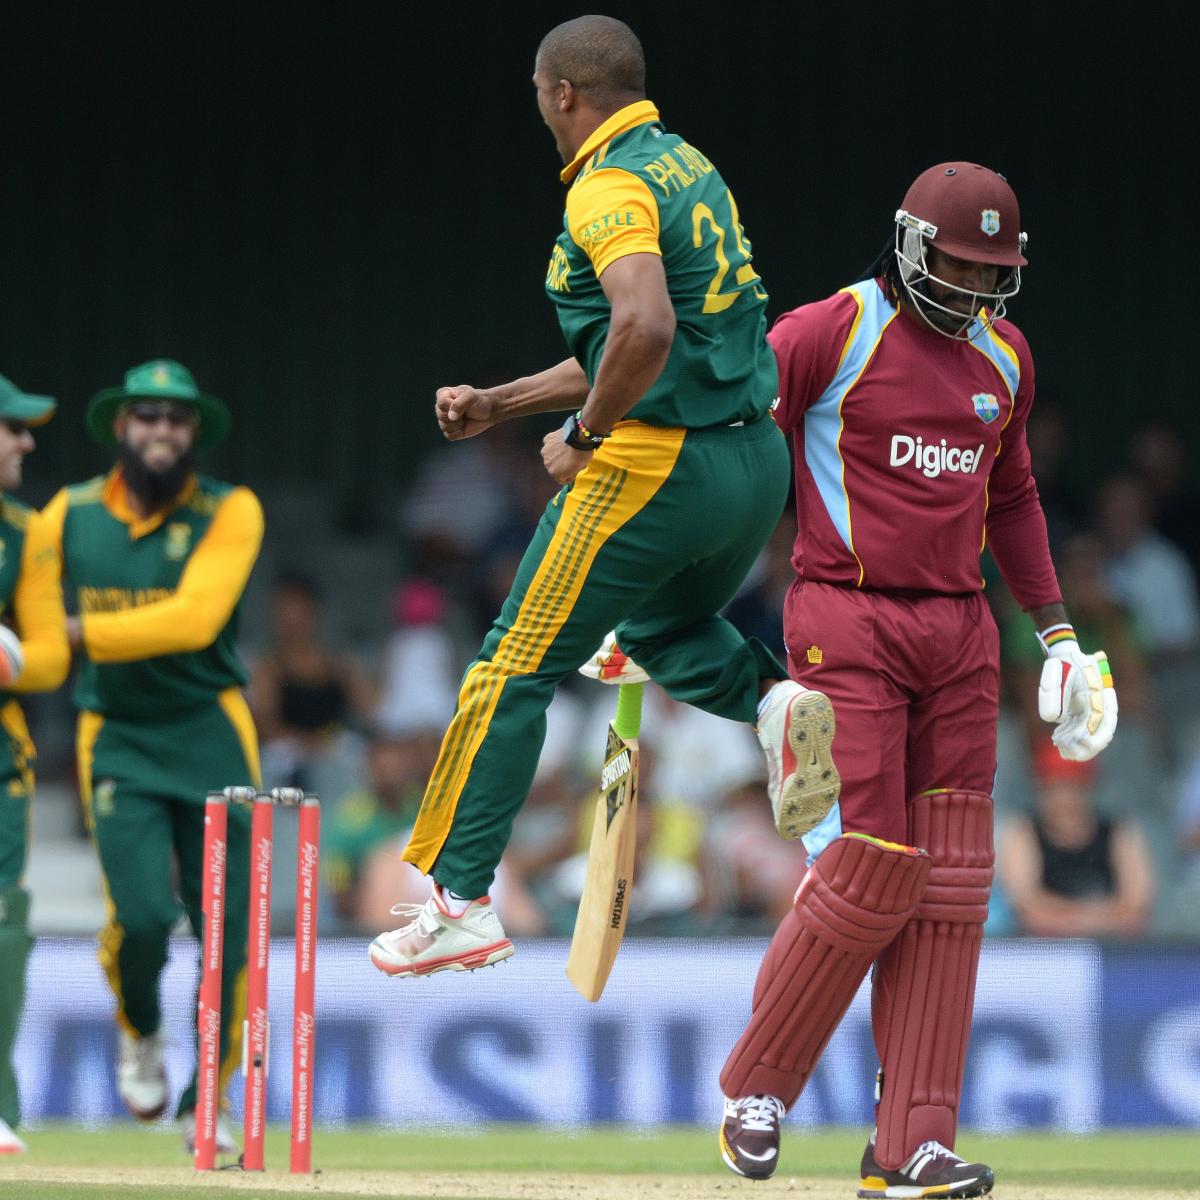 South Africa vs. West Indies, 3rd ODI Highlights, Scorecard and Report